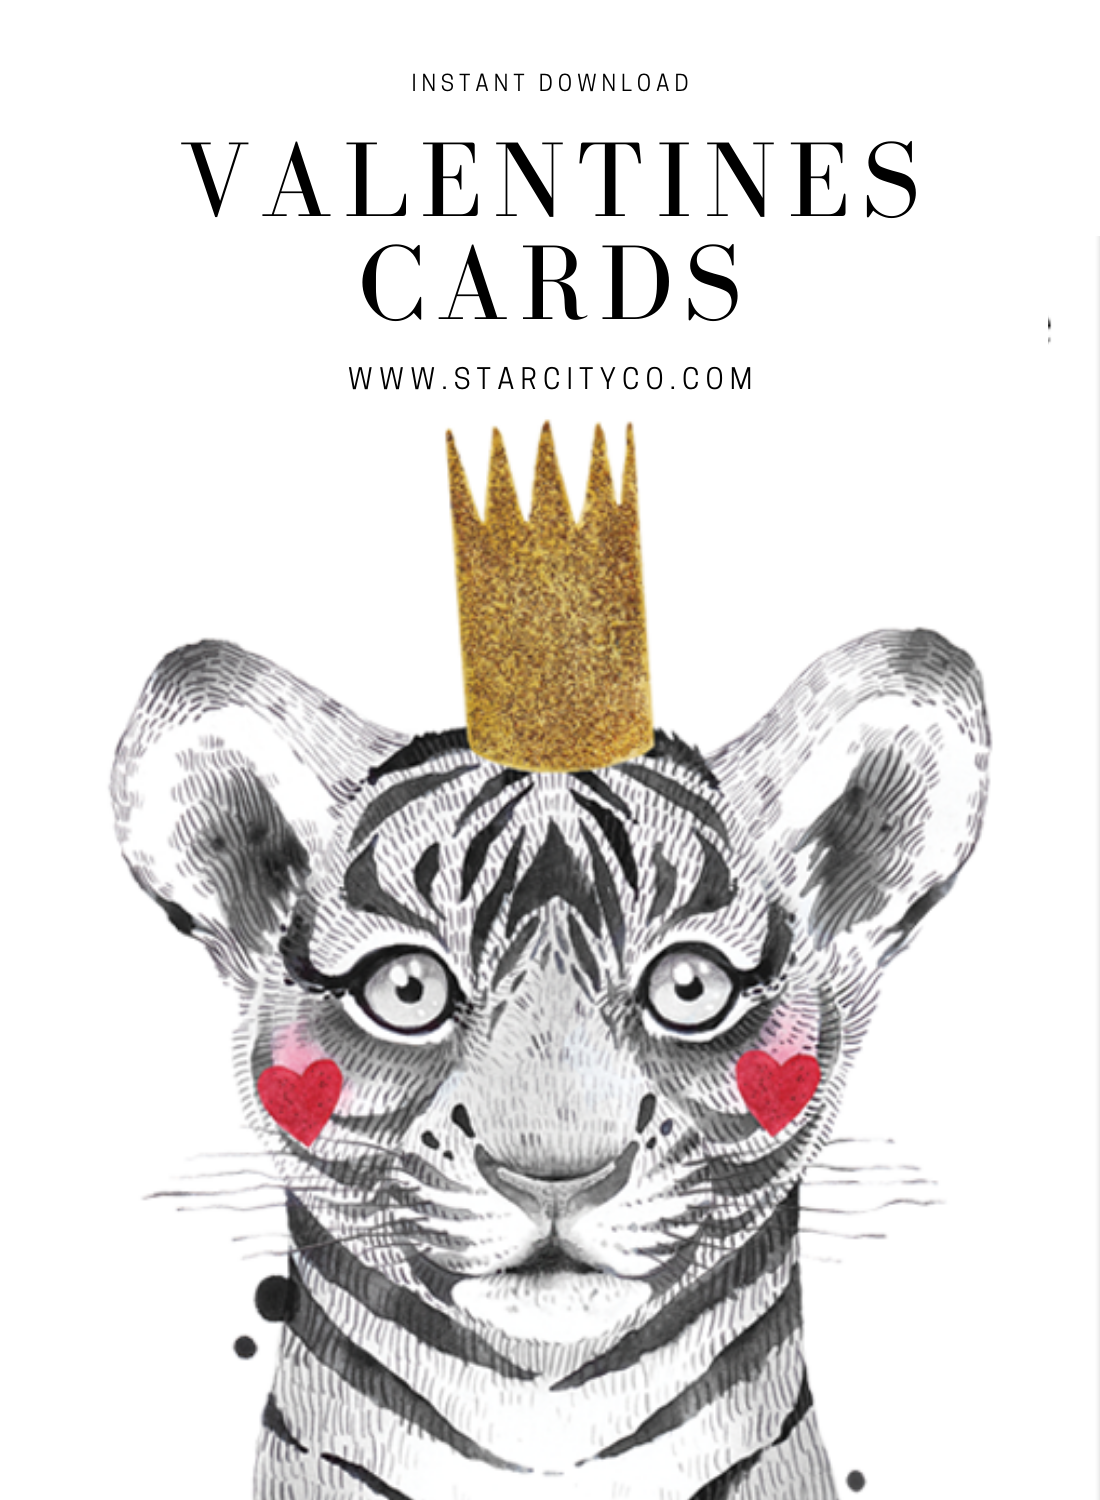 You're Pretty Great Tiger Valentine Card Printable - Digital Download